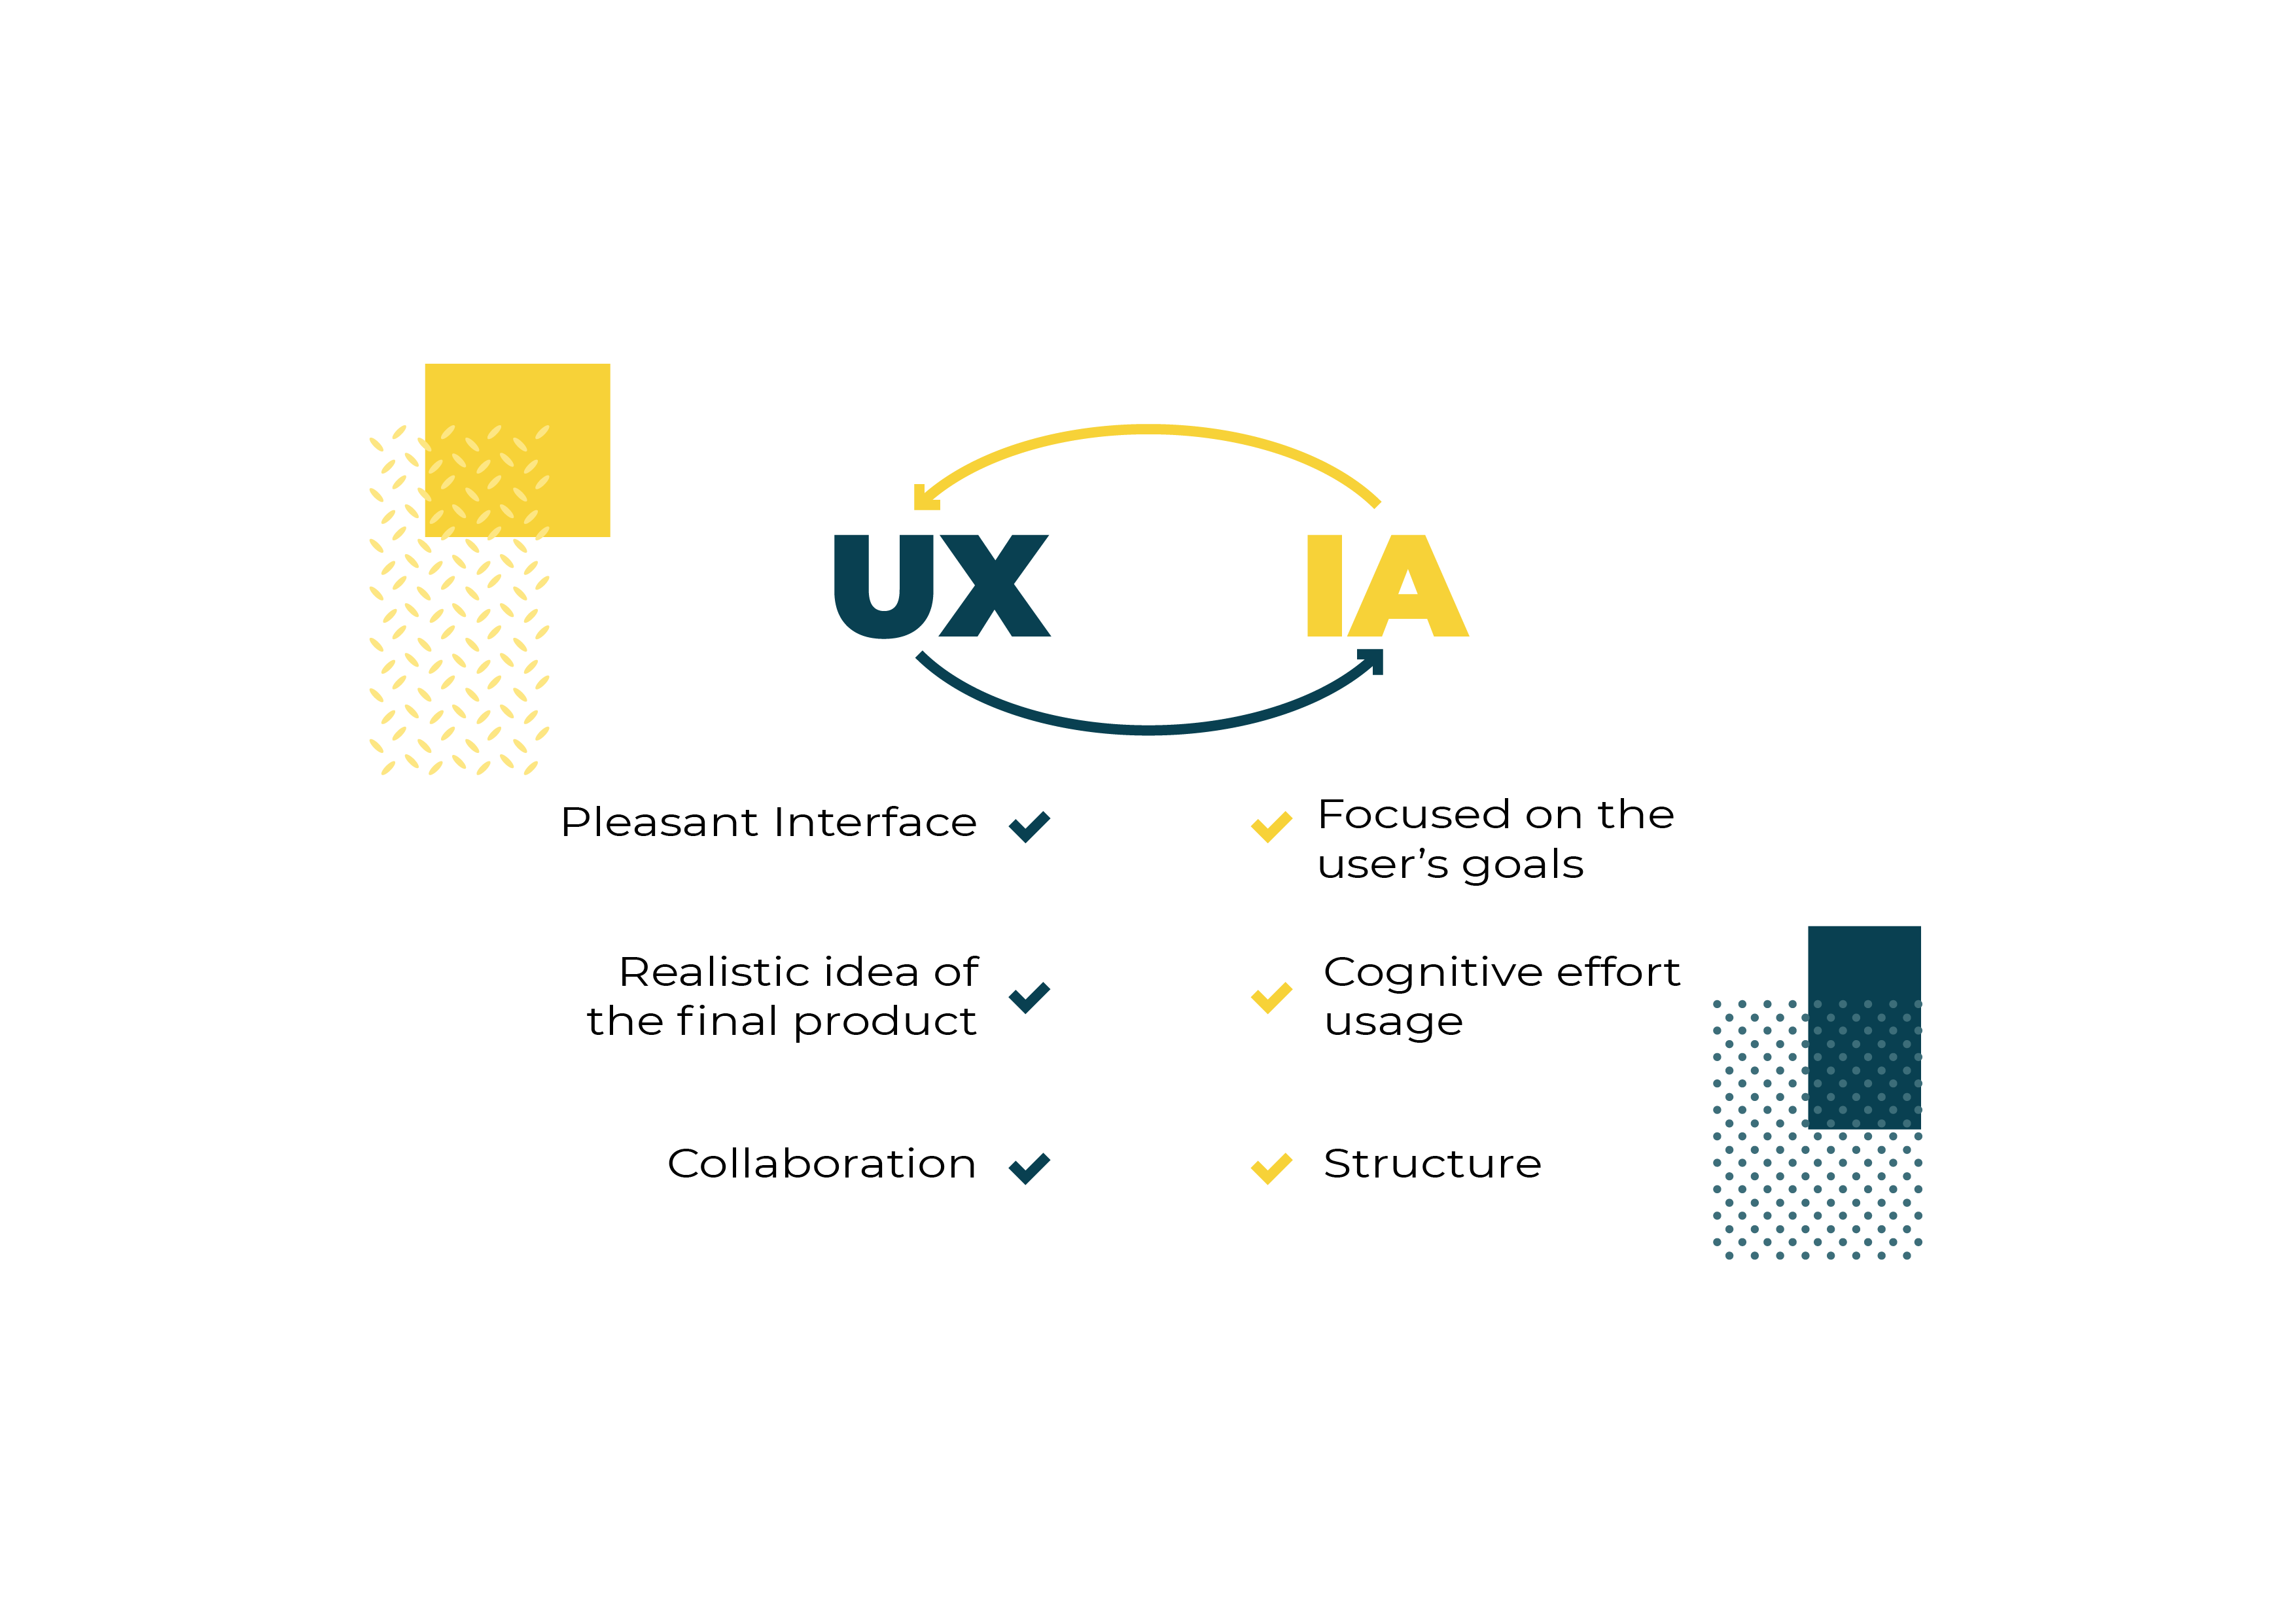 Graphic showing differences between UX and information architecture. Under UX are the following statements: pleasant interface, realistic idea of the final product, collaboration. Under IA are the following statements: focused on the user's goals, cognitive effort usage, structure.